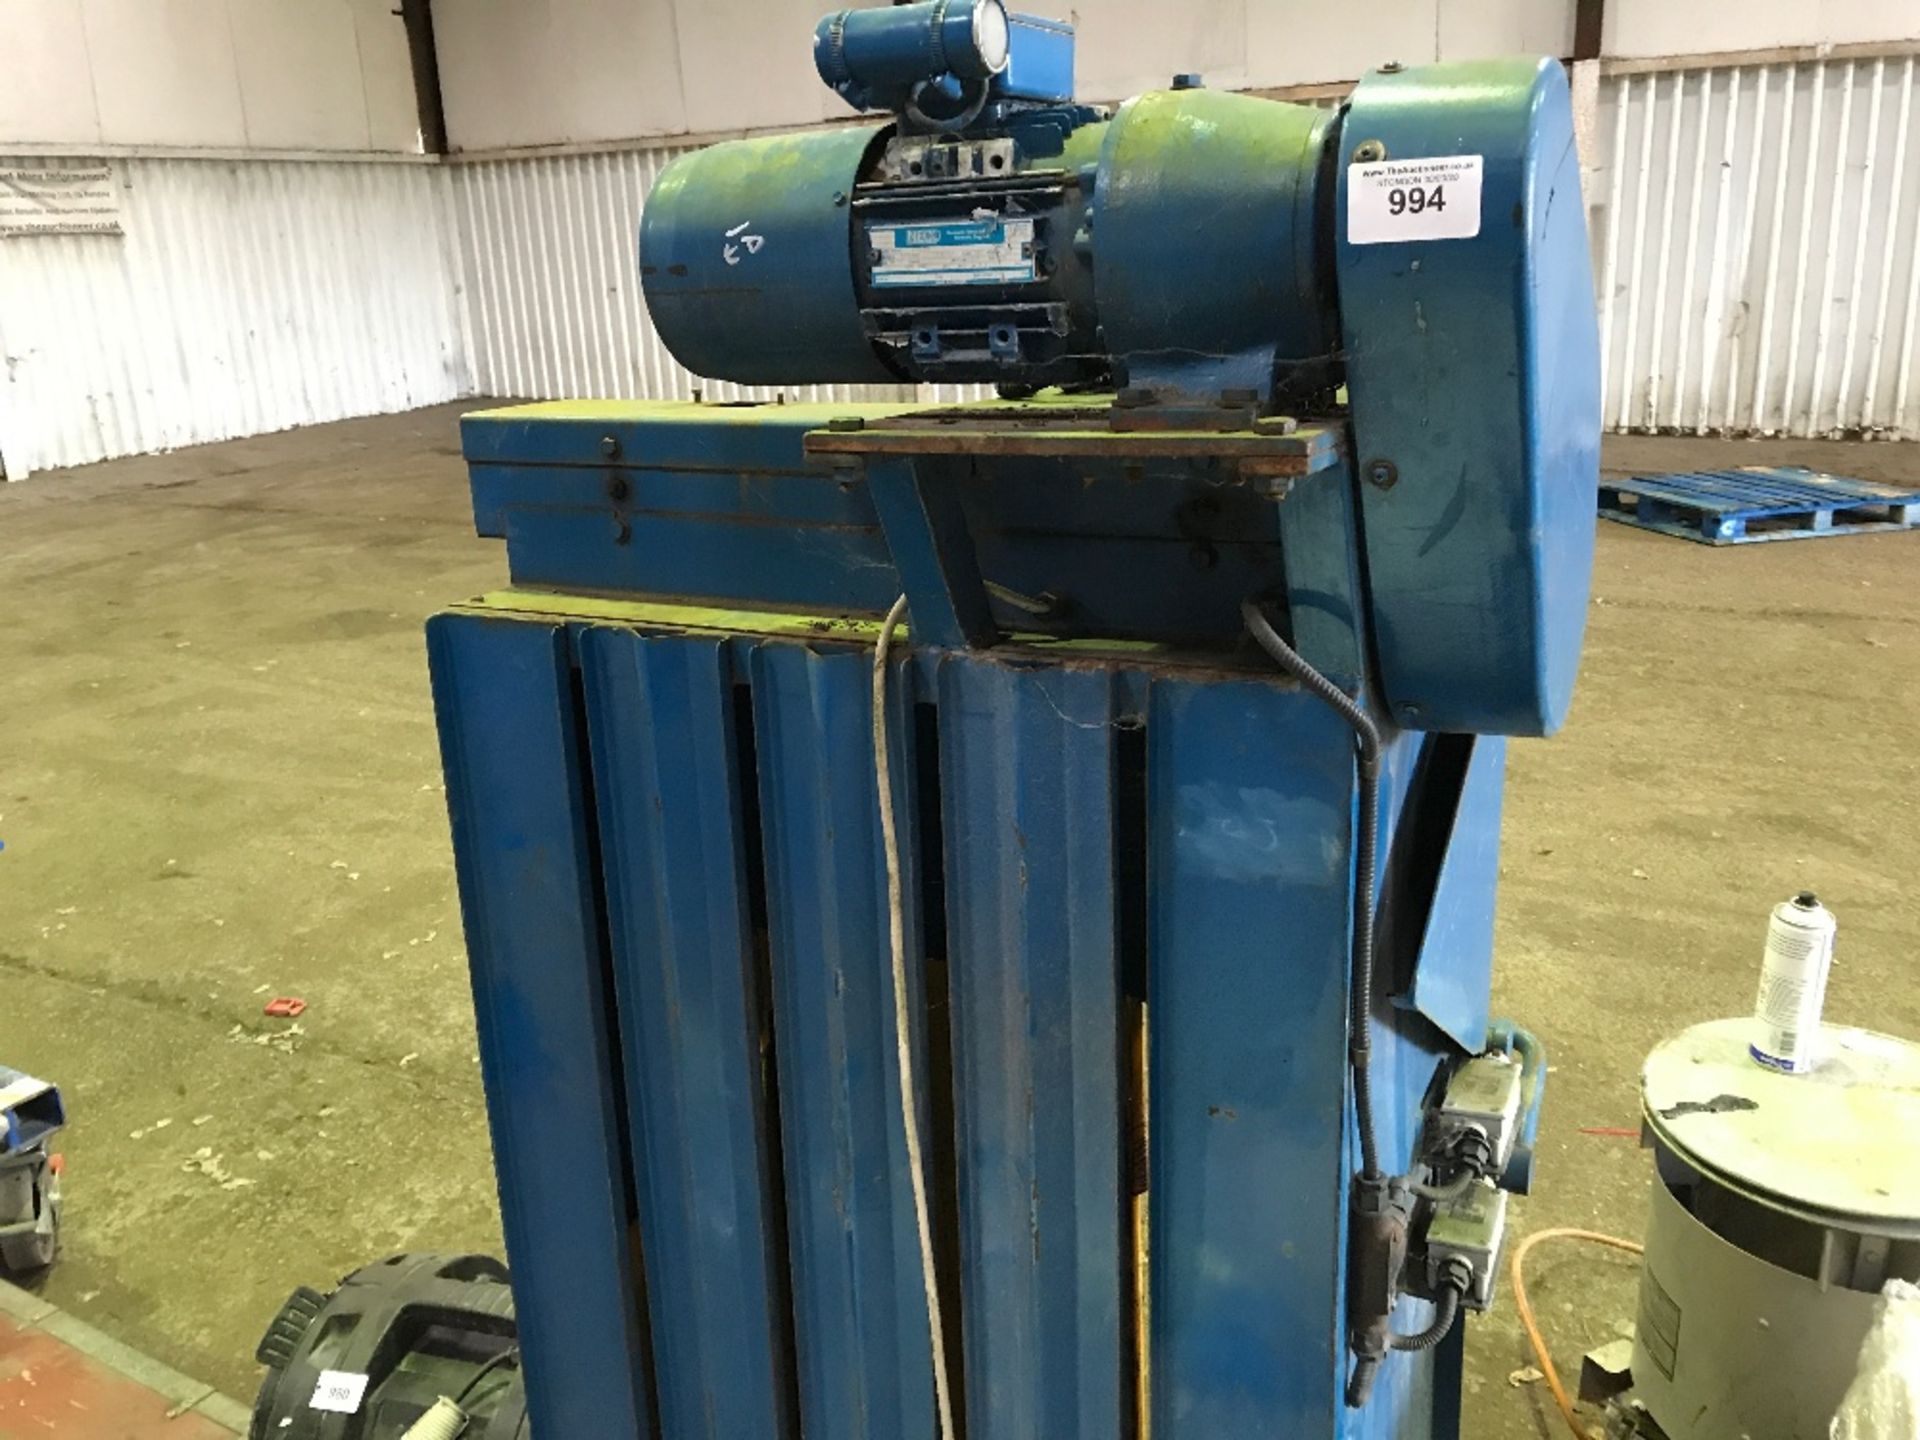 Small sized waste baler/compactor unit